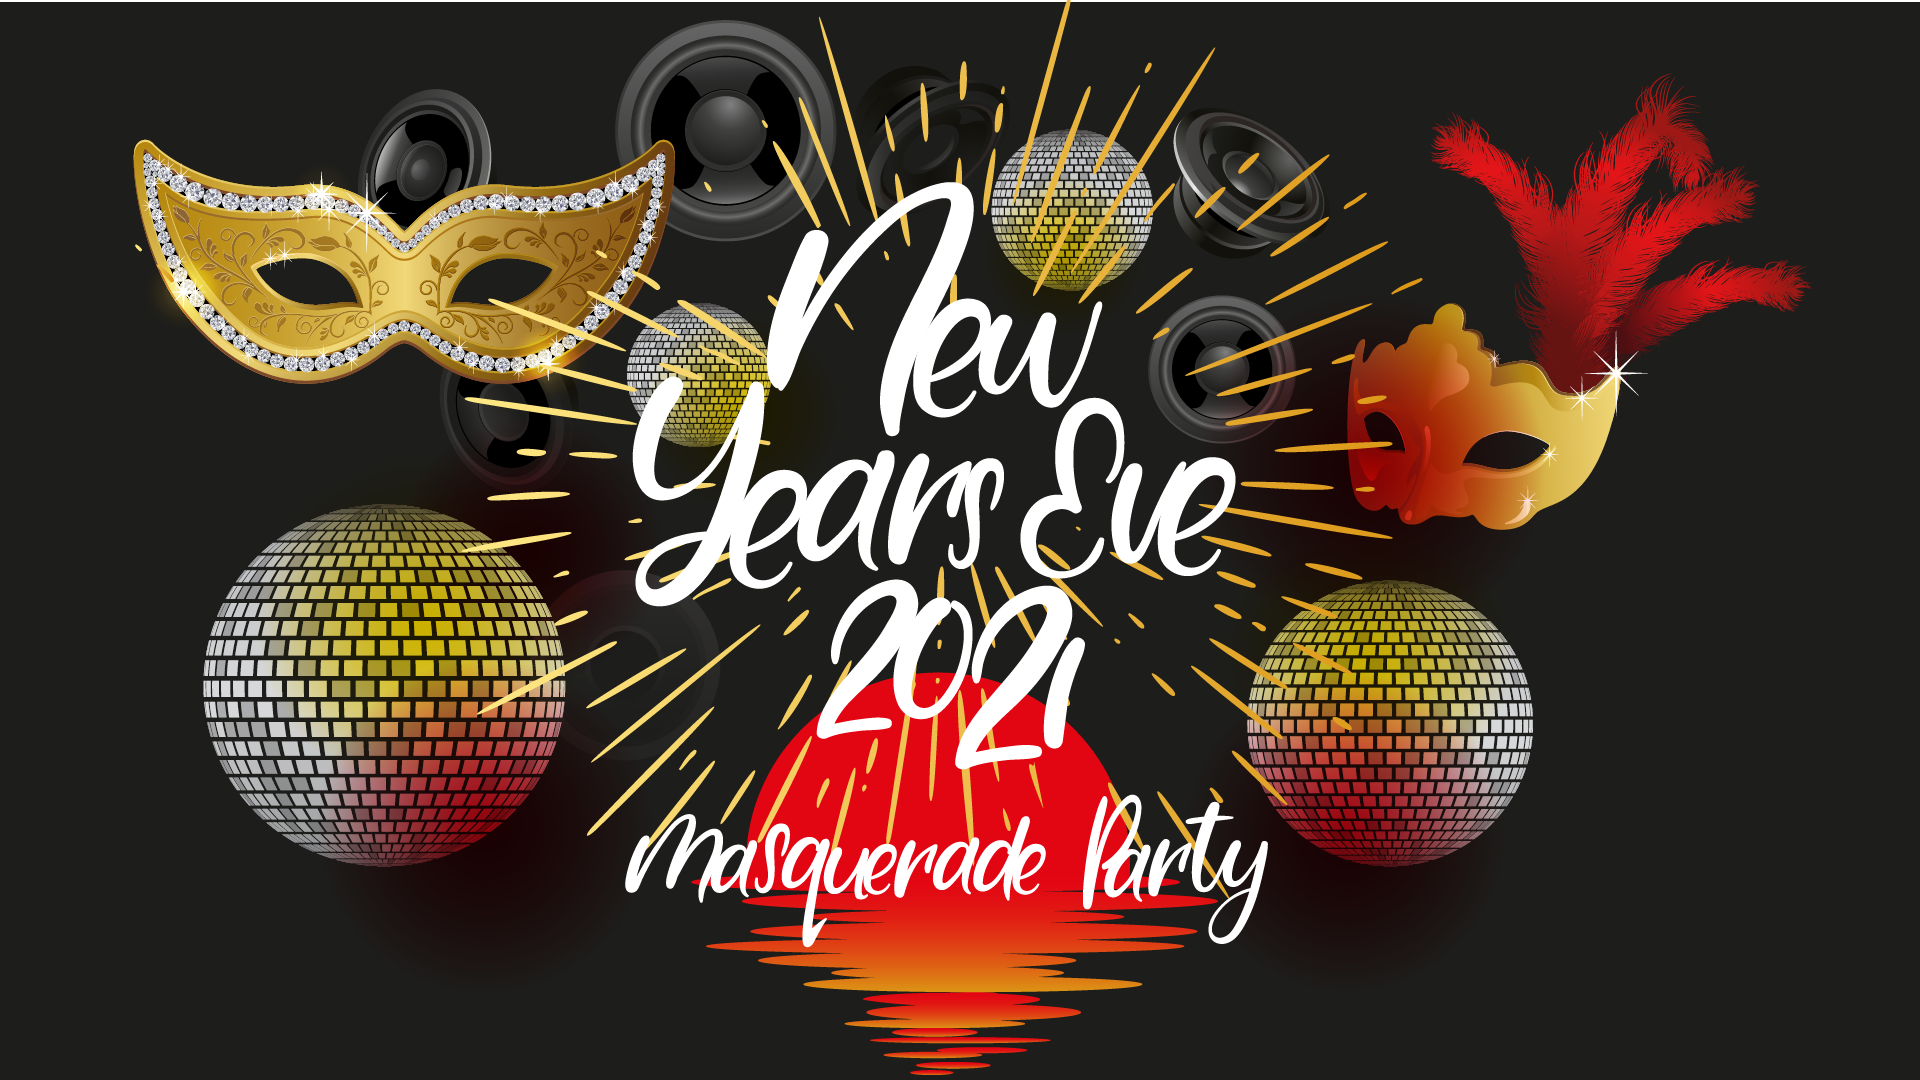 Bring in the New Year in style at the Masquerade Party at Key West on Bournemouth Pier